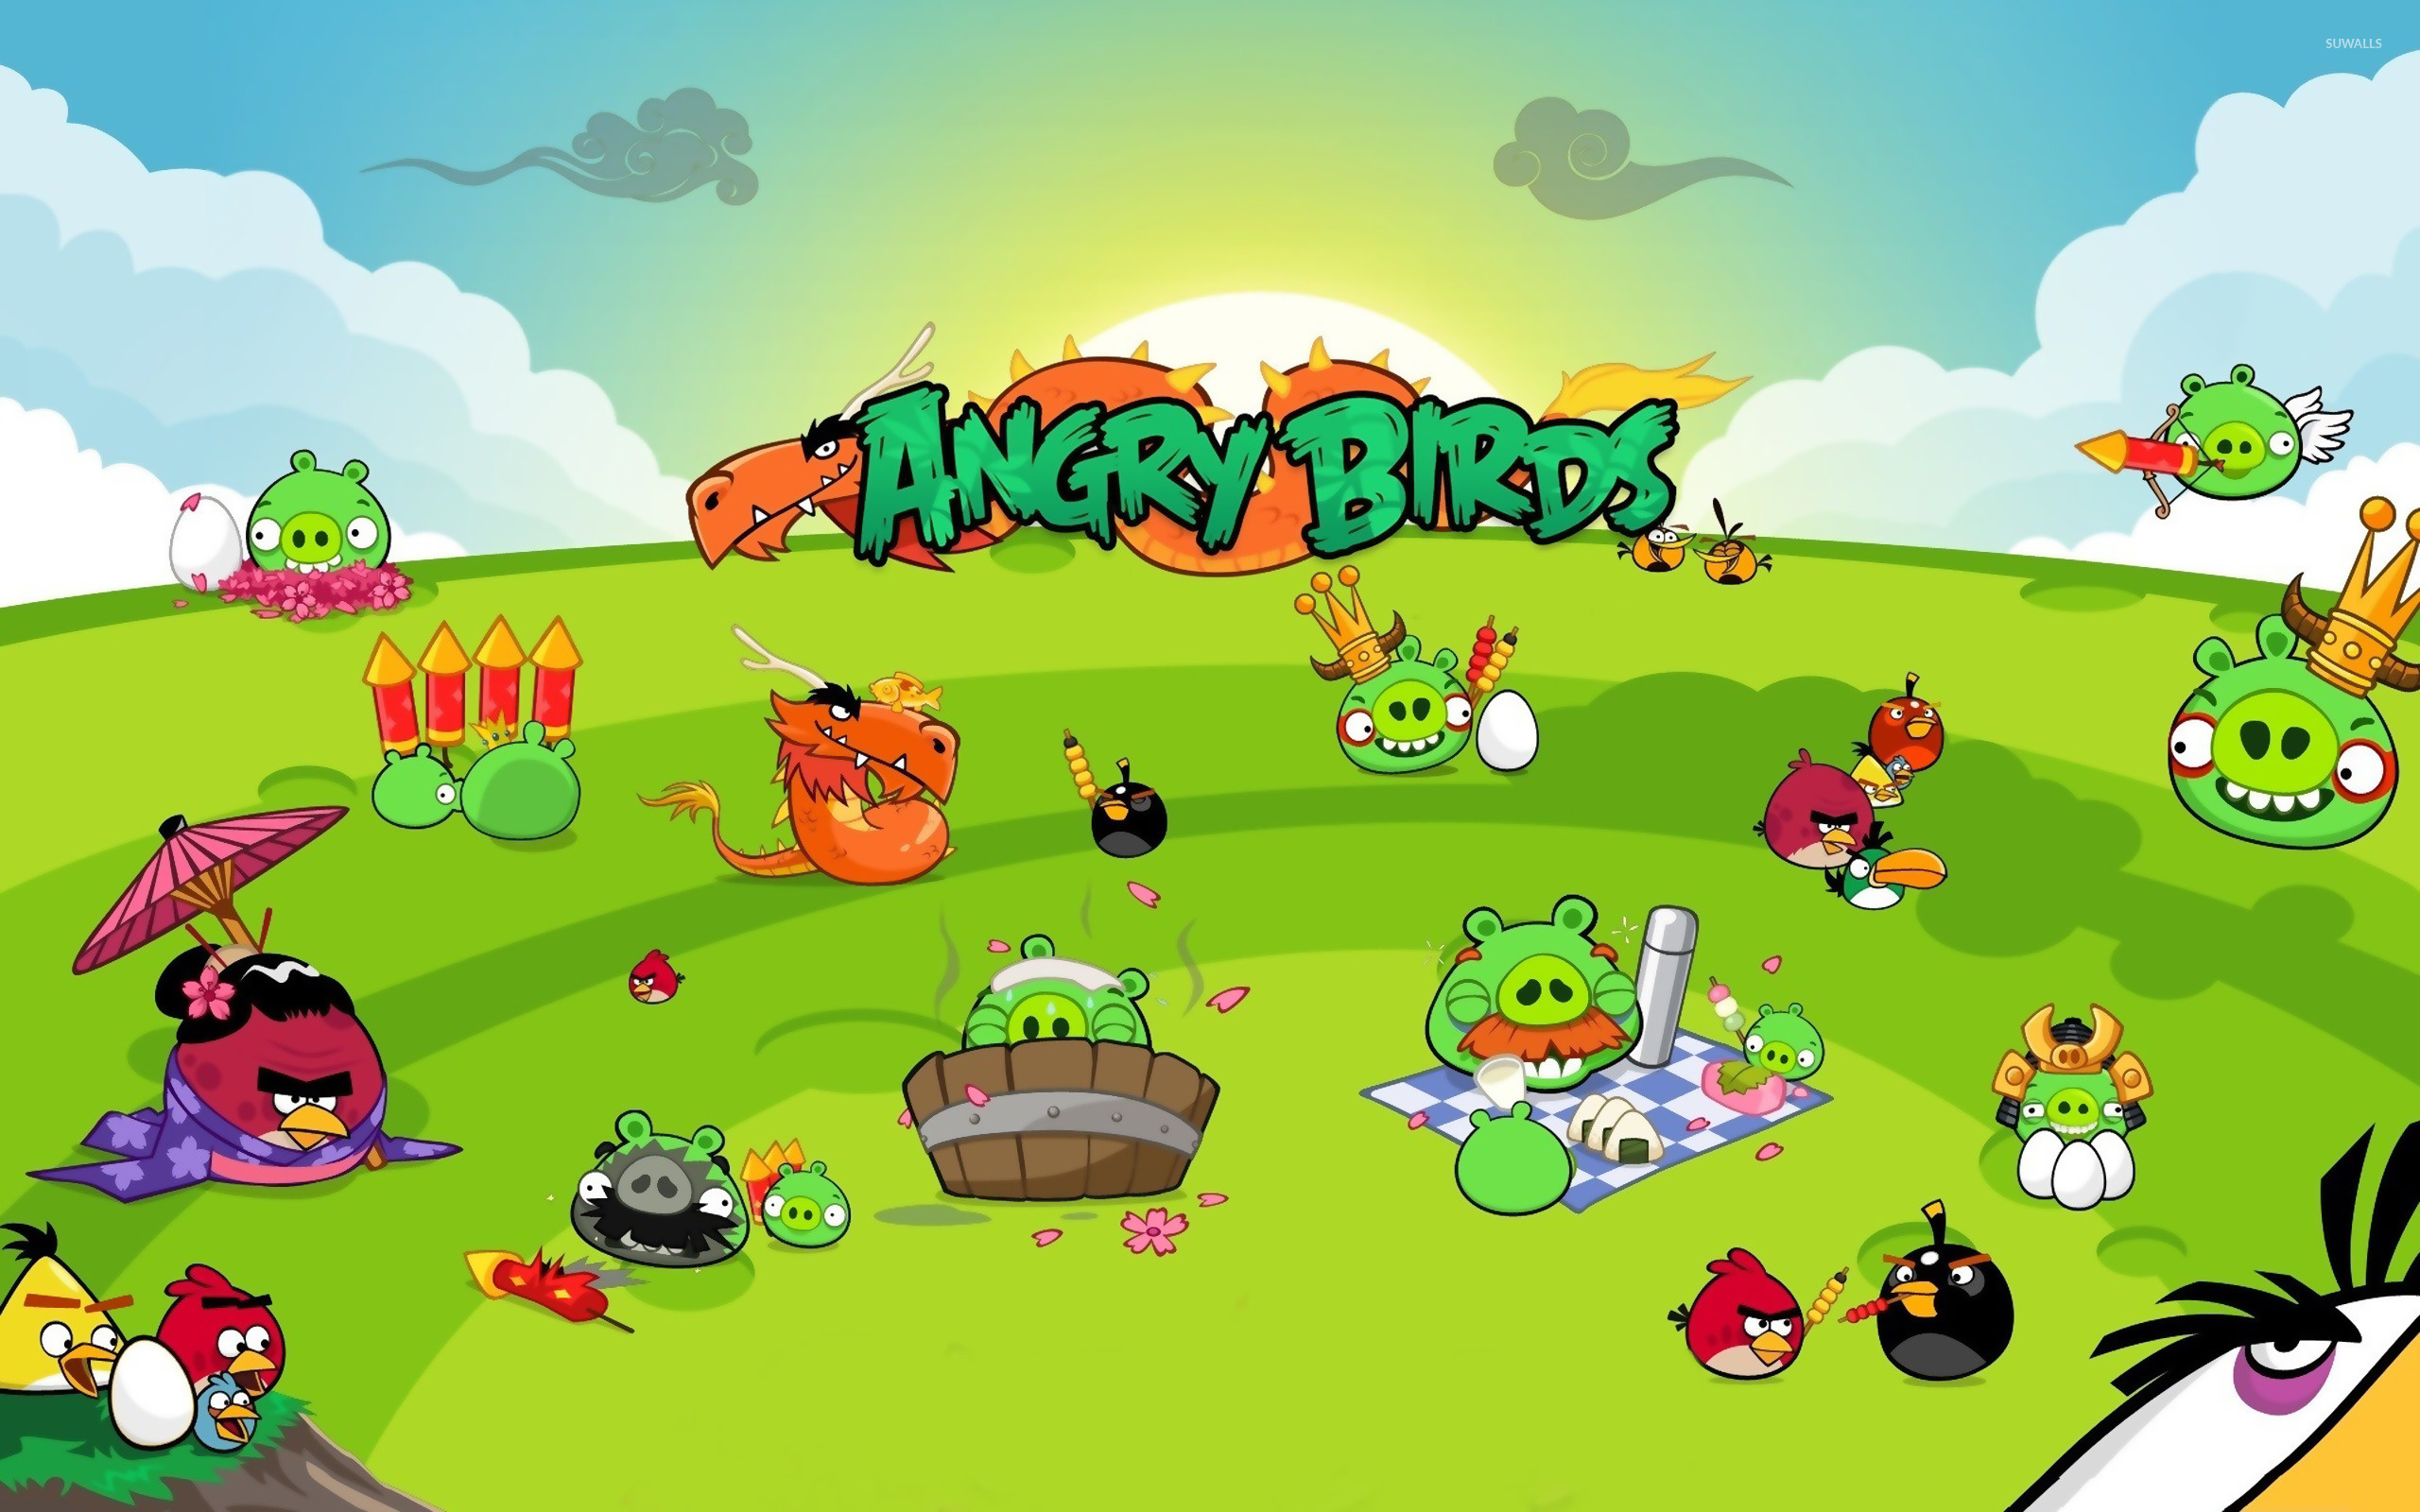 Angry Birds, Game wallpapers, Feathered frenzy, Avian adventure, 2560x1600 HD Desktop